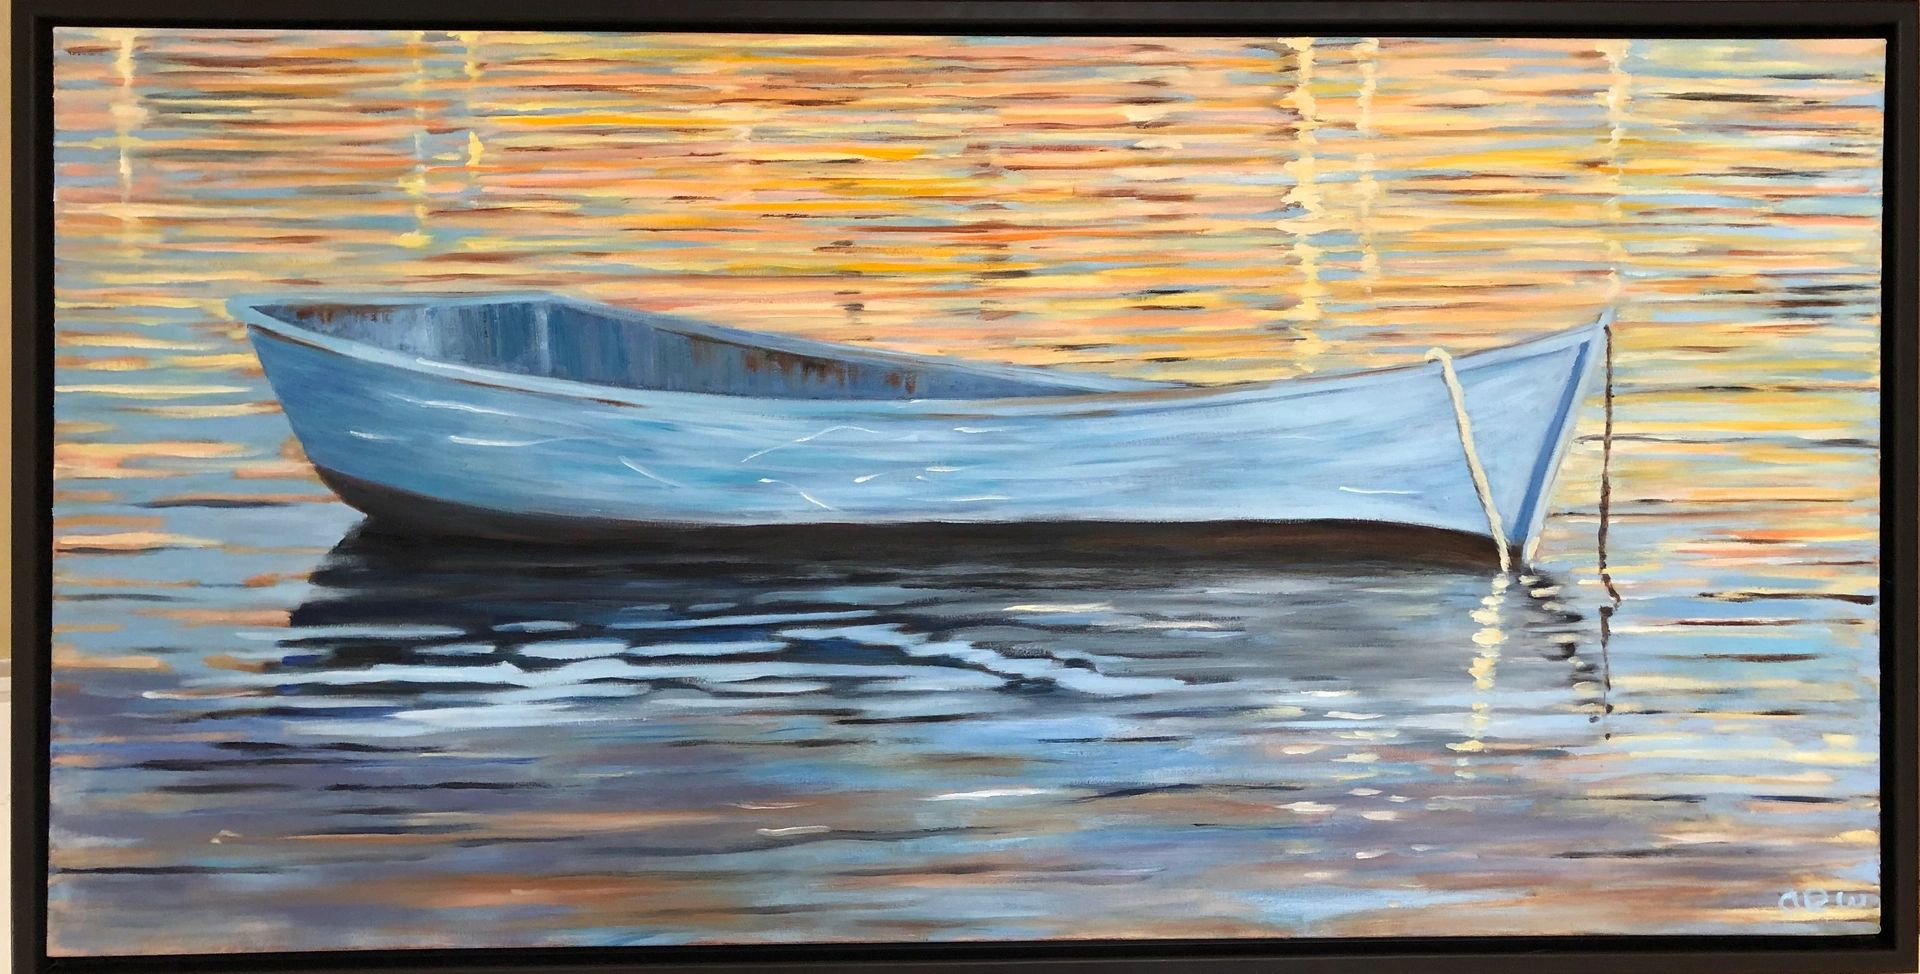 Blue Row Boat, Oil on Canvas, 24"x48"